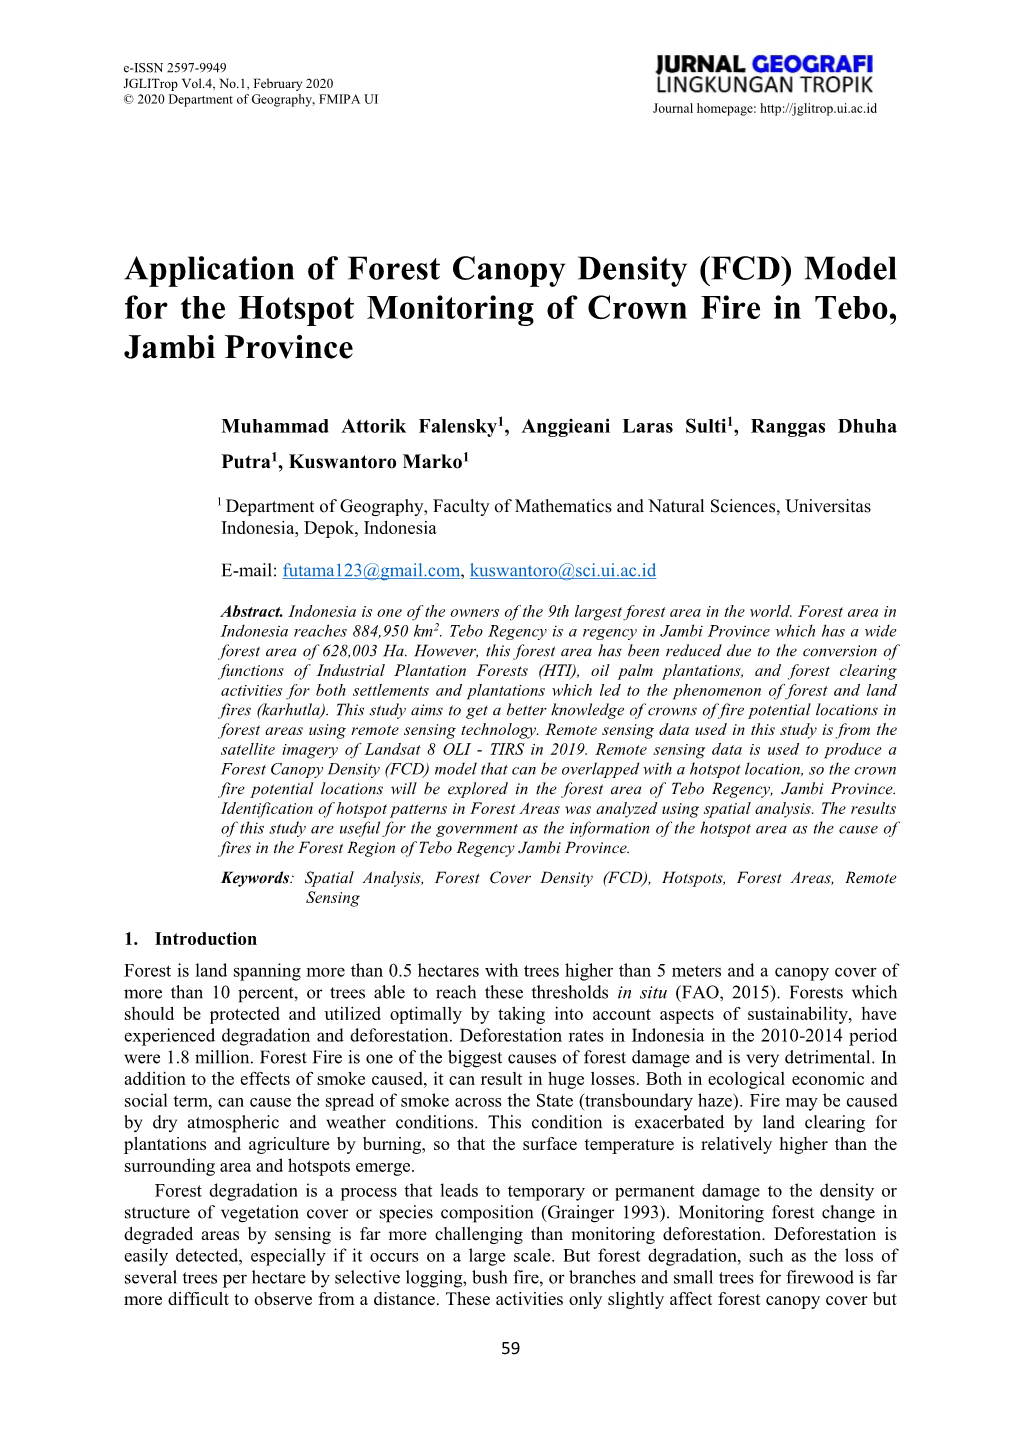 Application of Forest Canopy Density (FCD) Model for the Hotspot Monitoring of Crown Fire in Tebo, Jambi Province